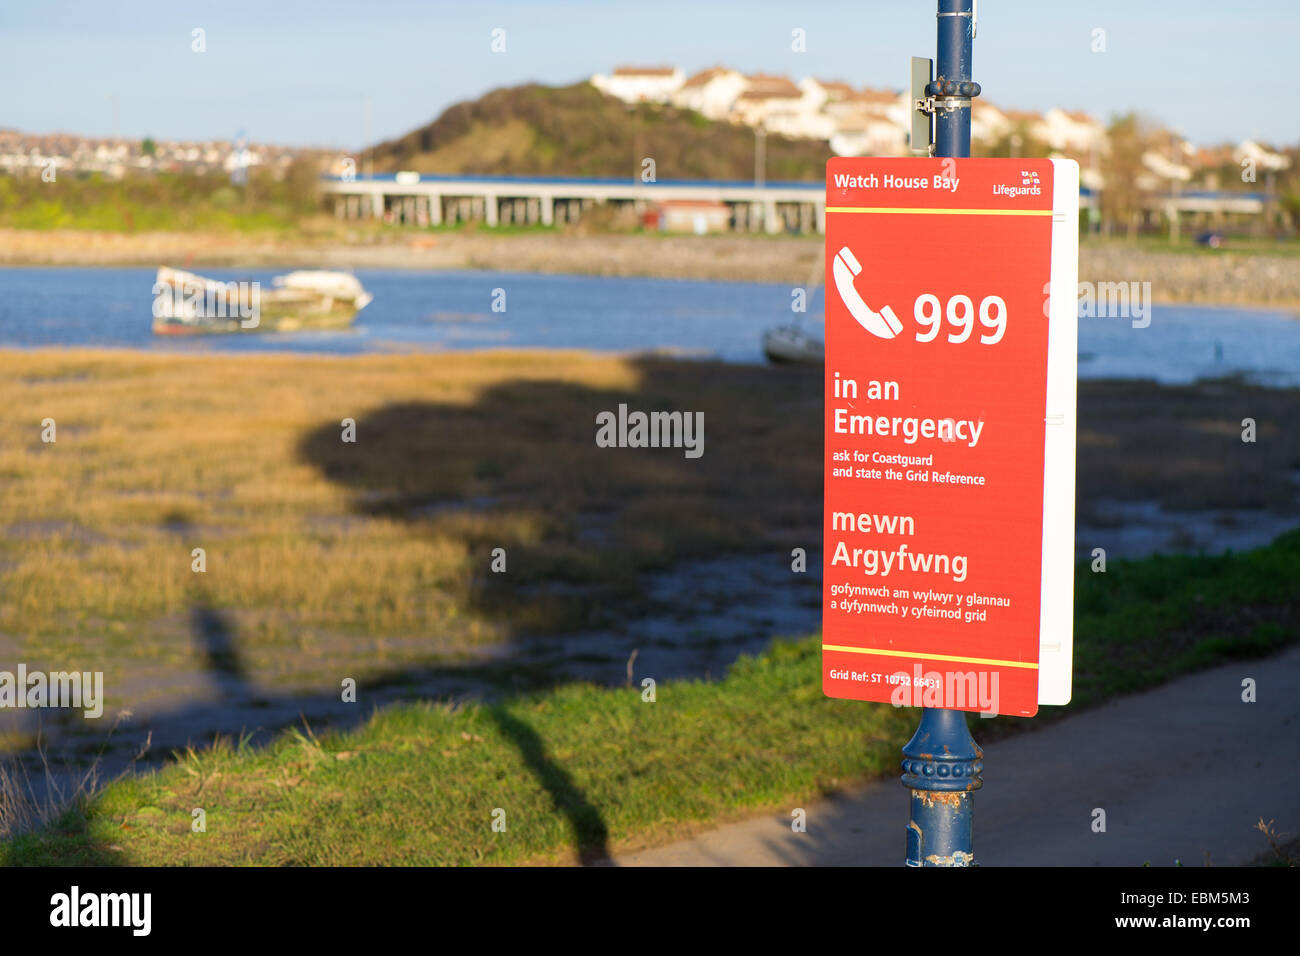 An emergency telephone to call the coastguard on 999, in Barry Island, Wales, UK. Stock Photo